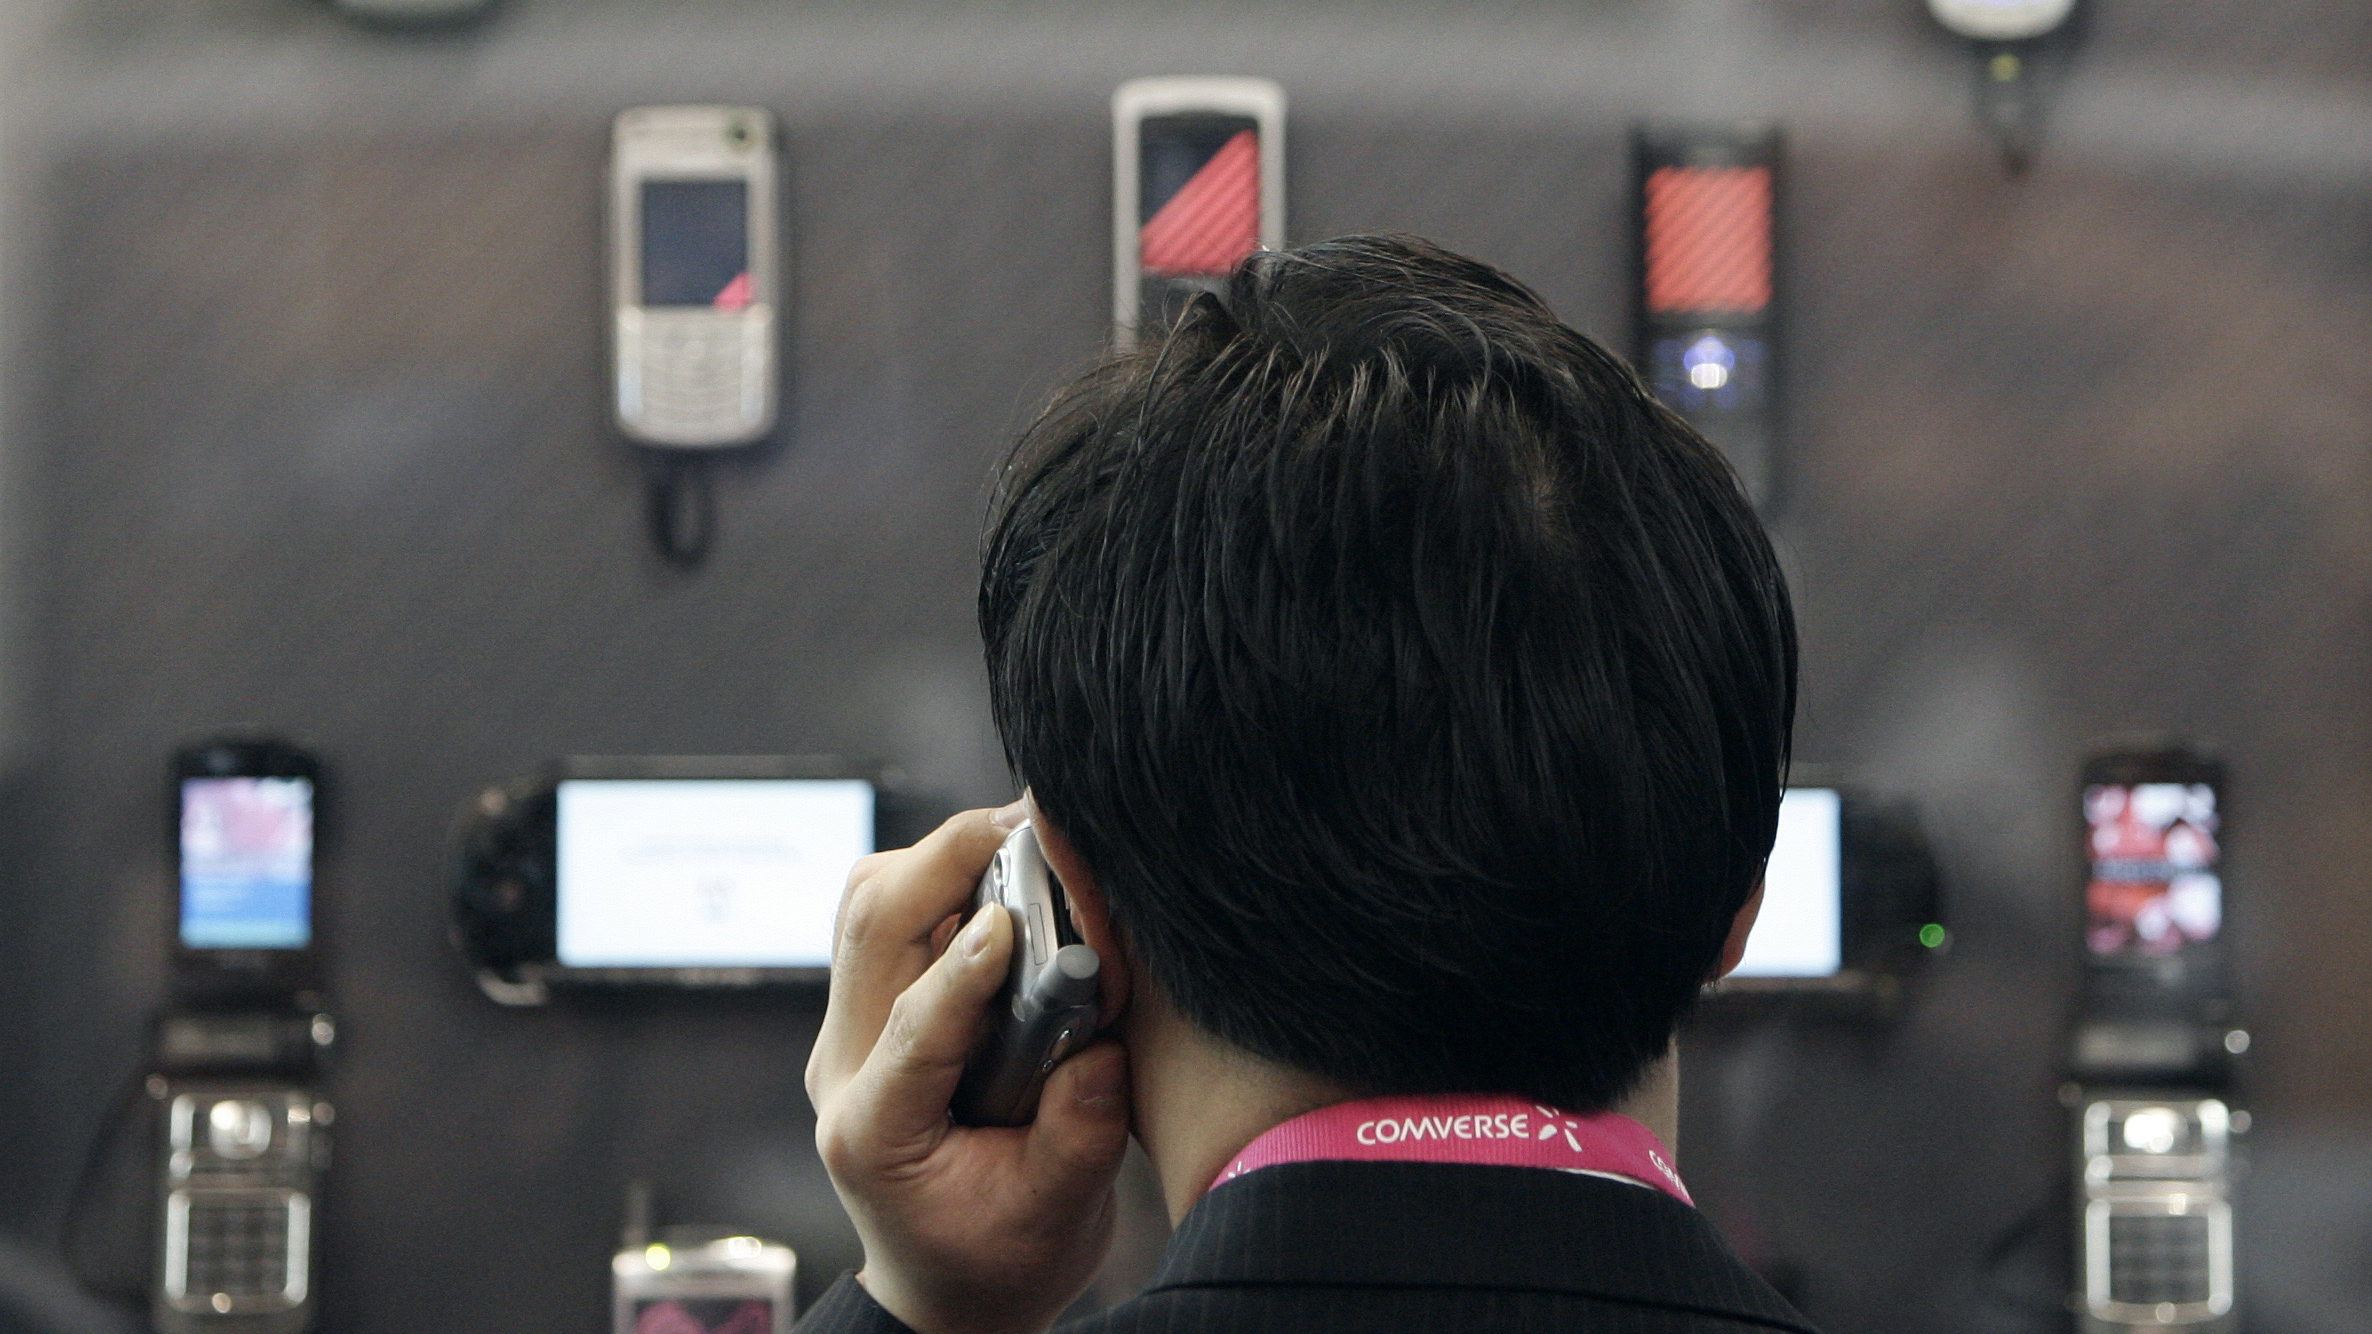 MWC 2016 Preview: What Smartphones And Other Goodies To Expect